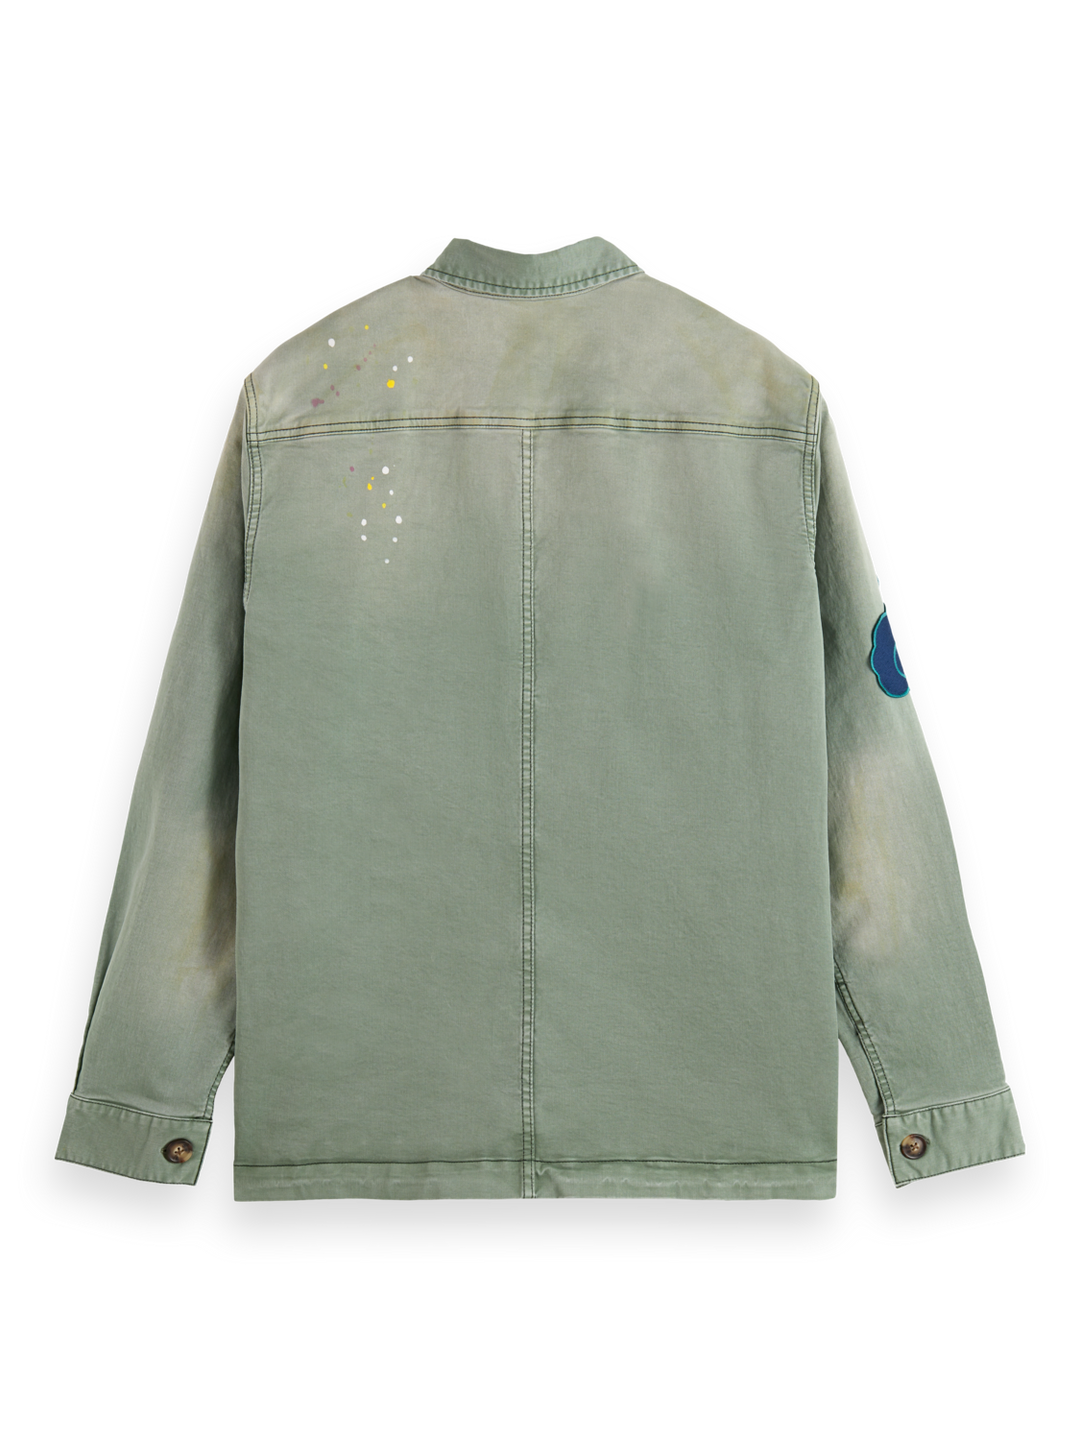 Worker Jacket with Special Wash and Badges in Army | Buster McGee